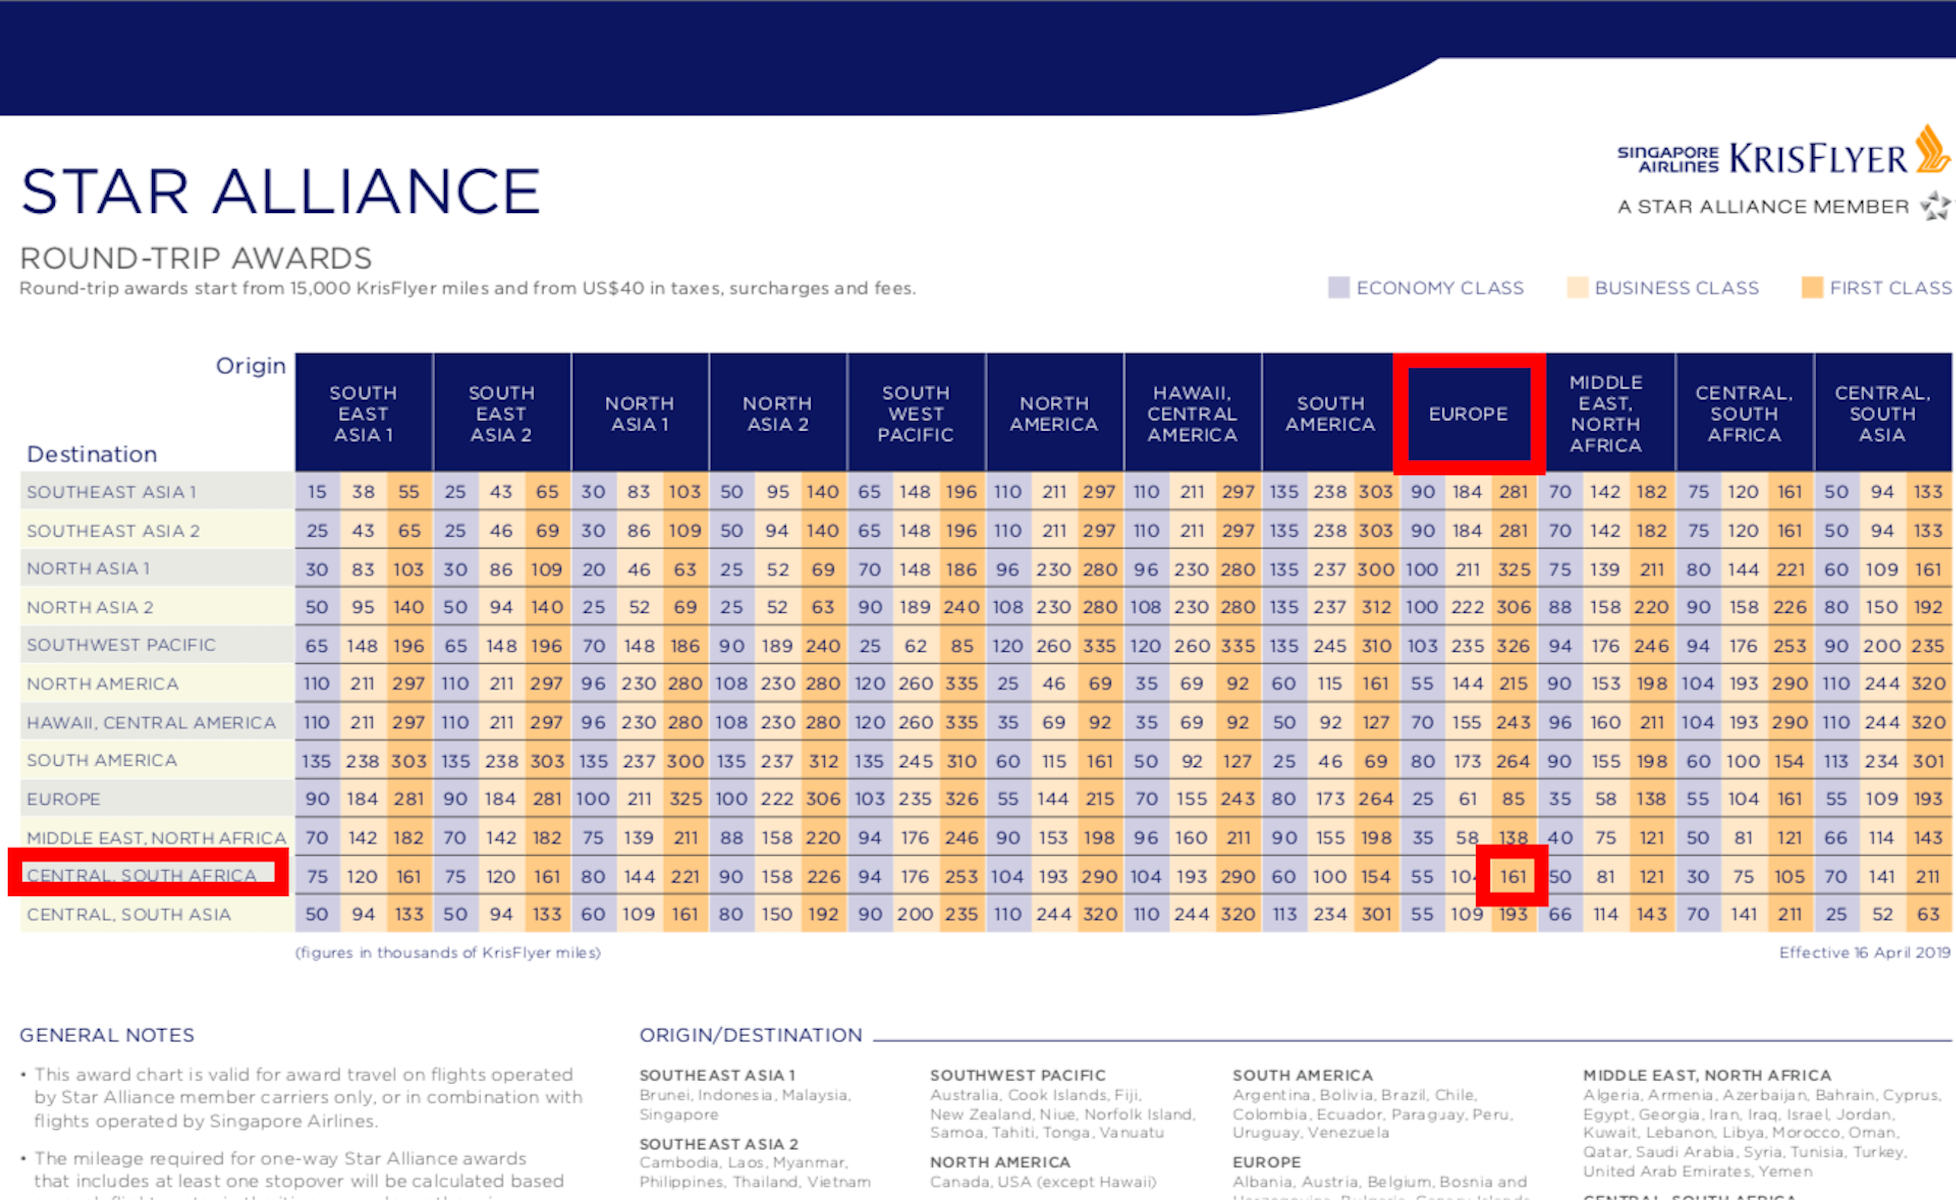 Singapore Airlines Star Alliance award chart